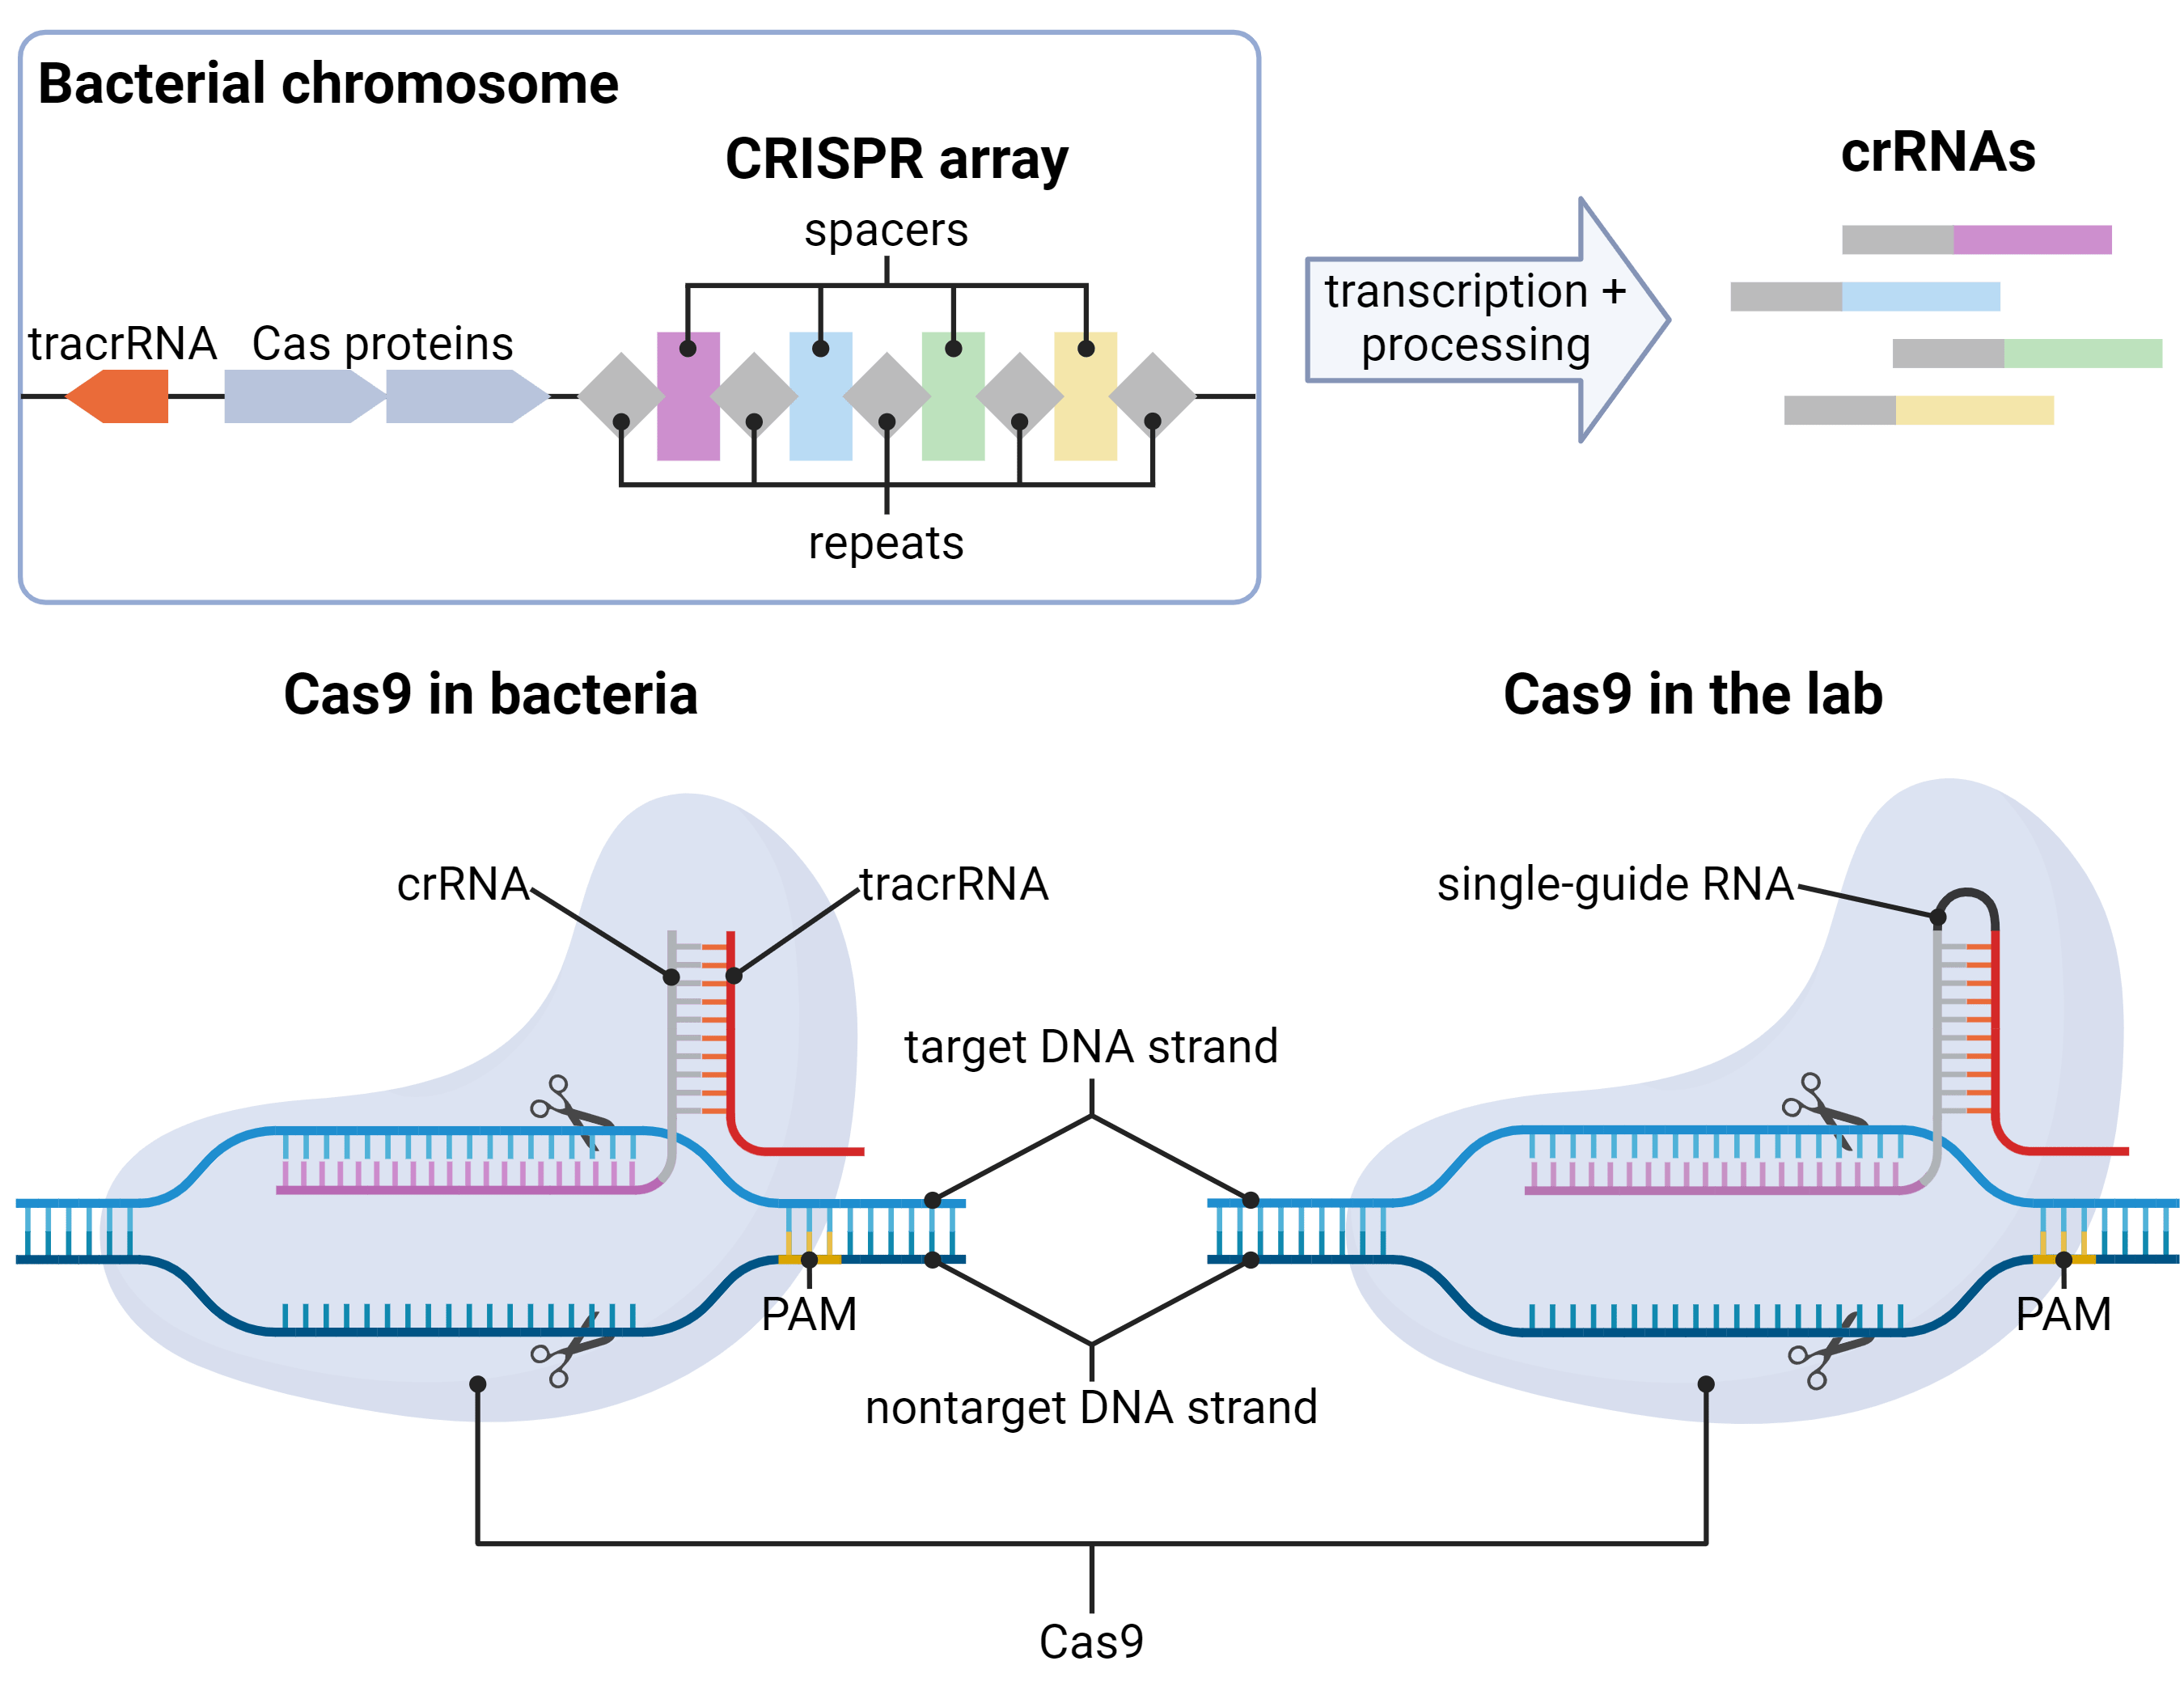 Overview of the parts of CRISPR. The bacterial chromosome encodes a tracrRNA (in some systems including Cas9), Cas proteins, and a CRISPR array. The CRISPR array is composed of identical repeat sequences and variable spacer sequences. The array is transcribed and processed into crRNAs, each including one repeat and one spacer. In bacteria, these crRNAs are bound by Cas proteins (Cas9 shown here). The repeat sequence base pairs with the tracrRNA, and the spacer sequence is used to target complementary DNA sequences. In laboratory settings, an sgRNA includes the crRNA and tracrRNA sequences in a “single-guide RNA” that performs both functions. Cas9 cuts both the target and nontarget DNA strands upstream of the PAM site found in the nontarget strand.